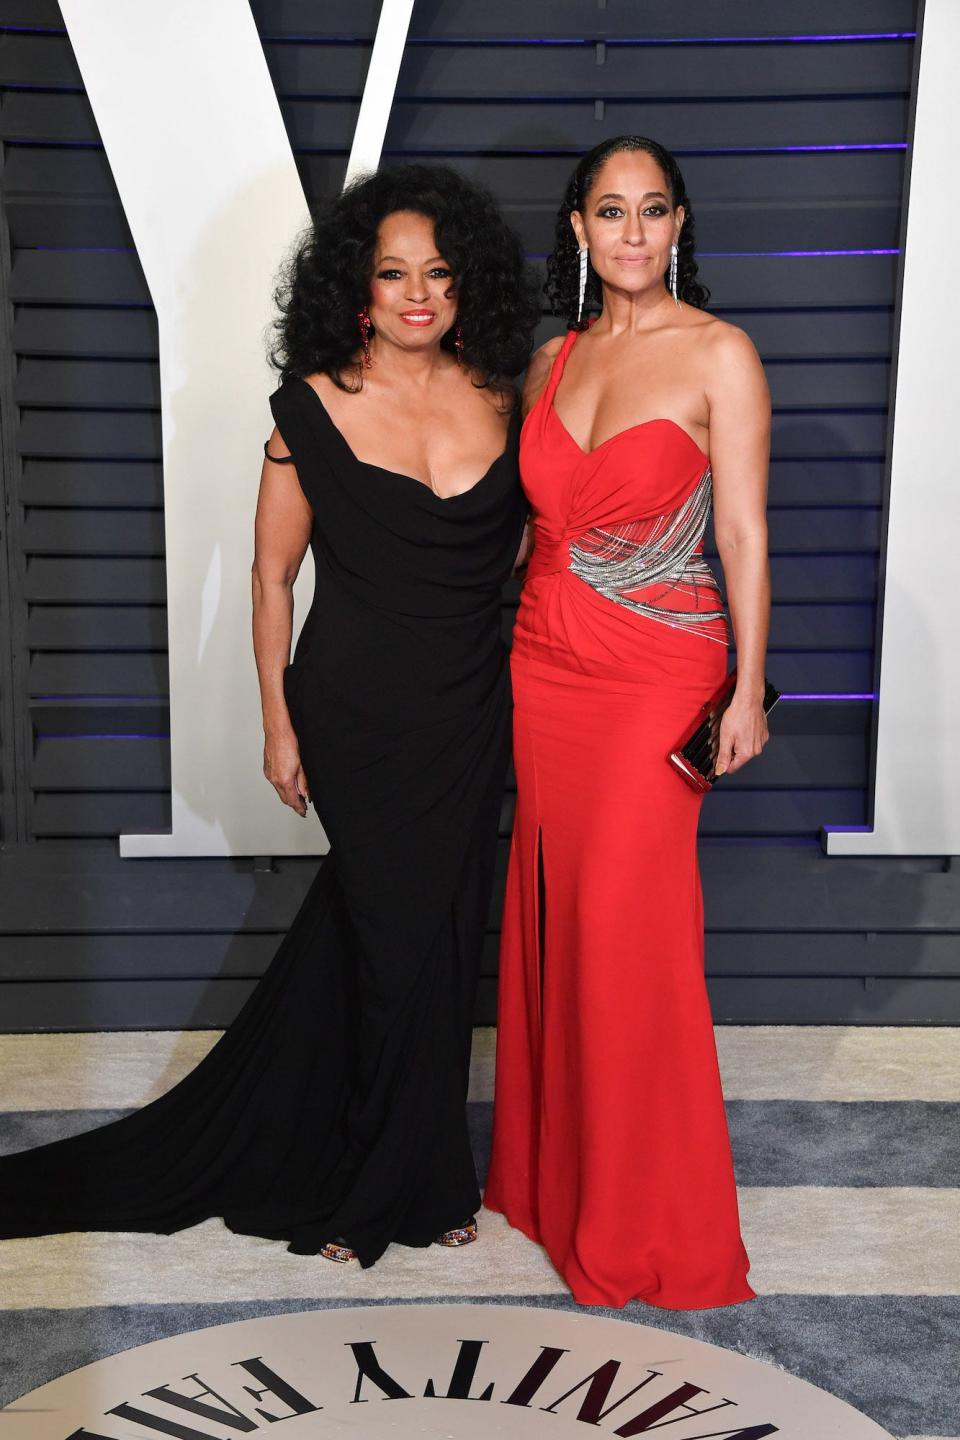 Diana Ross and Tracee Ellis Ross stand together on a red carpet on February 24, 2019.